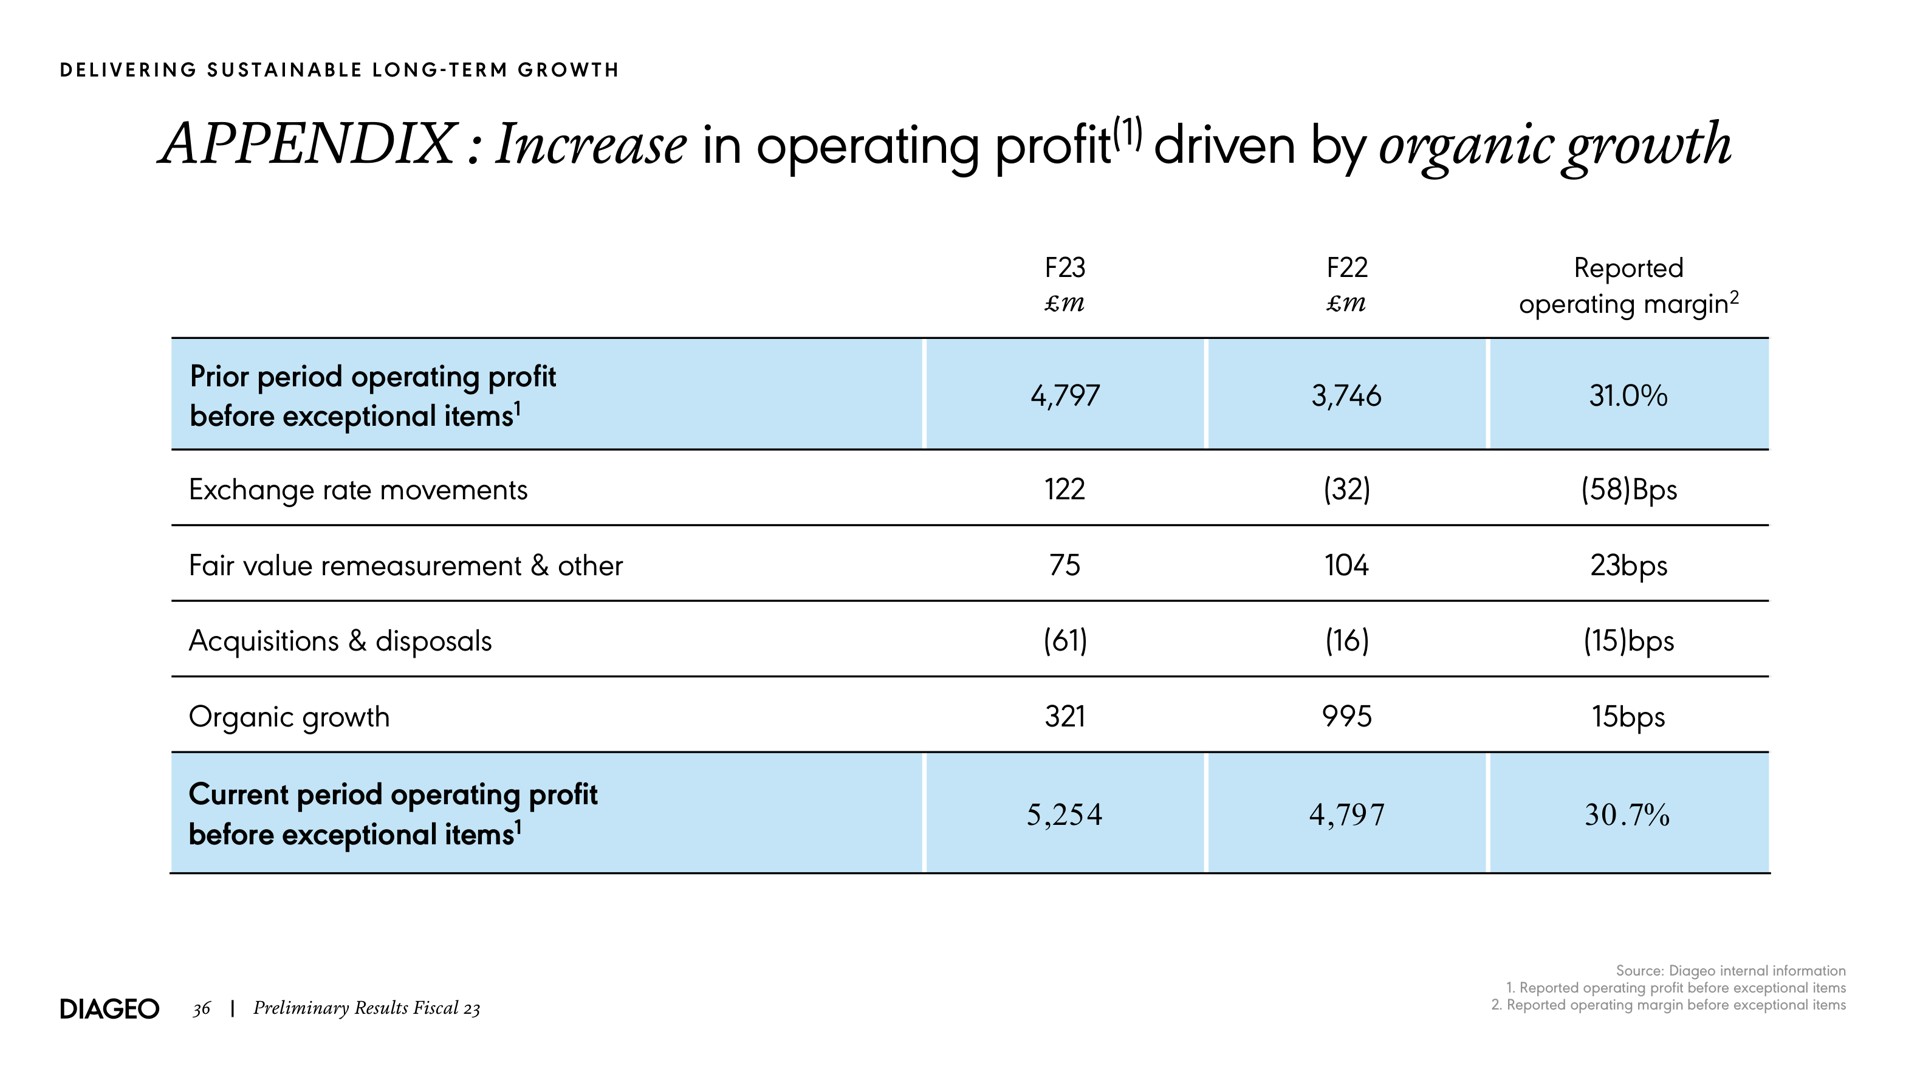 appendix increase in operating profit driven by organic growth prior period operating profit before exceptional items exchange rate movements fair value remeasurement other acquisitions disposals organic growth current period operating profit before exceptional items | Diageo